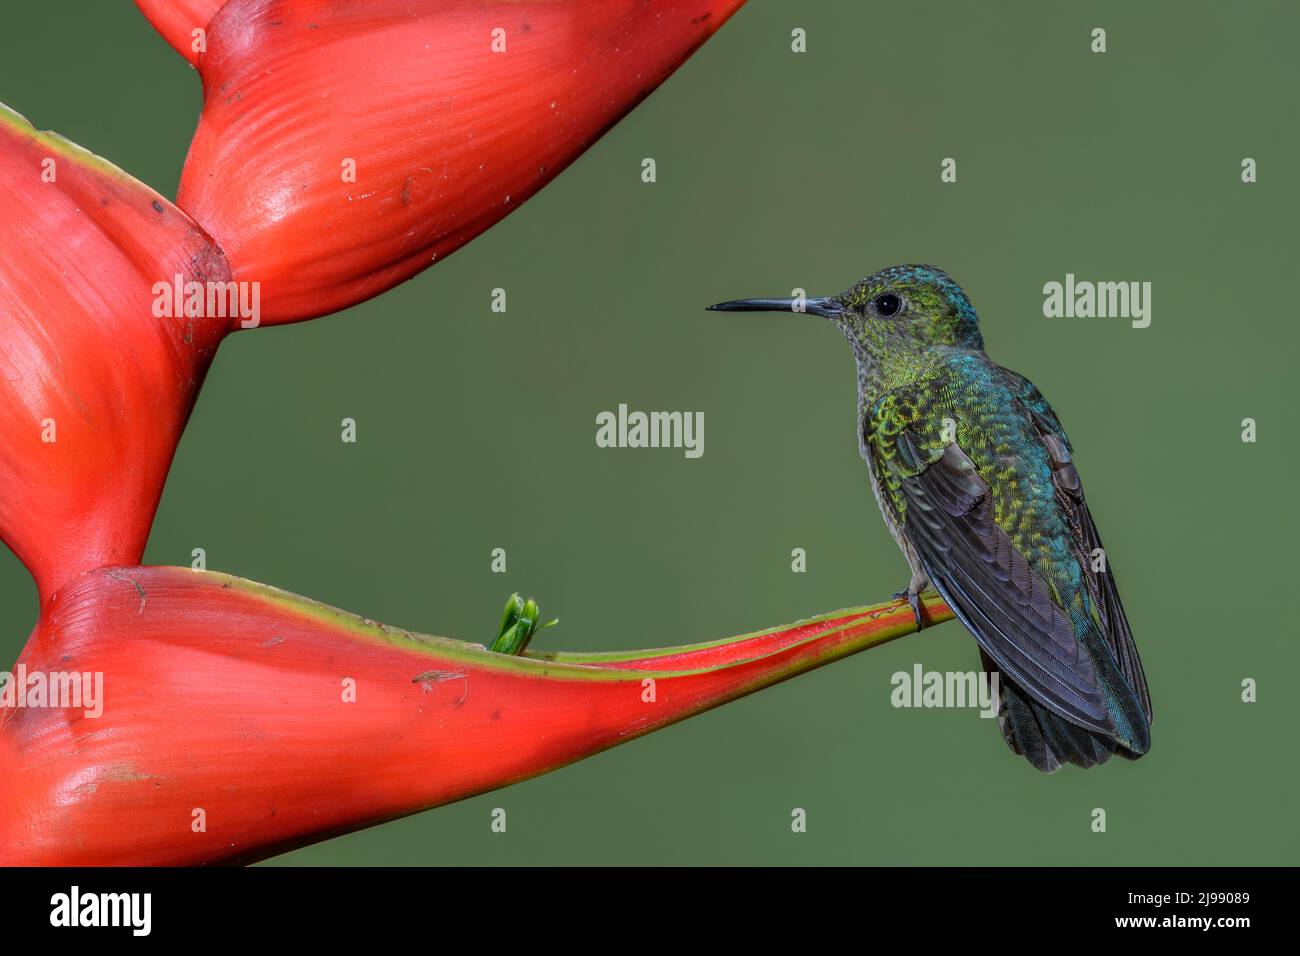 Blue-vented Hummingbird - Saucerottia hoffmanni, beautiful colored hummingbird from Central America forests and gardens, Costa Rica. Stock Photo